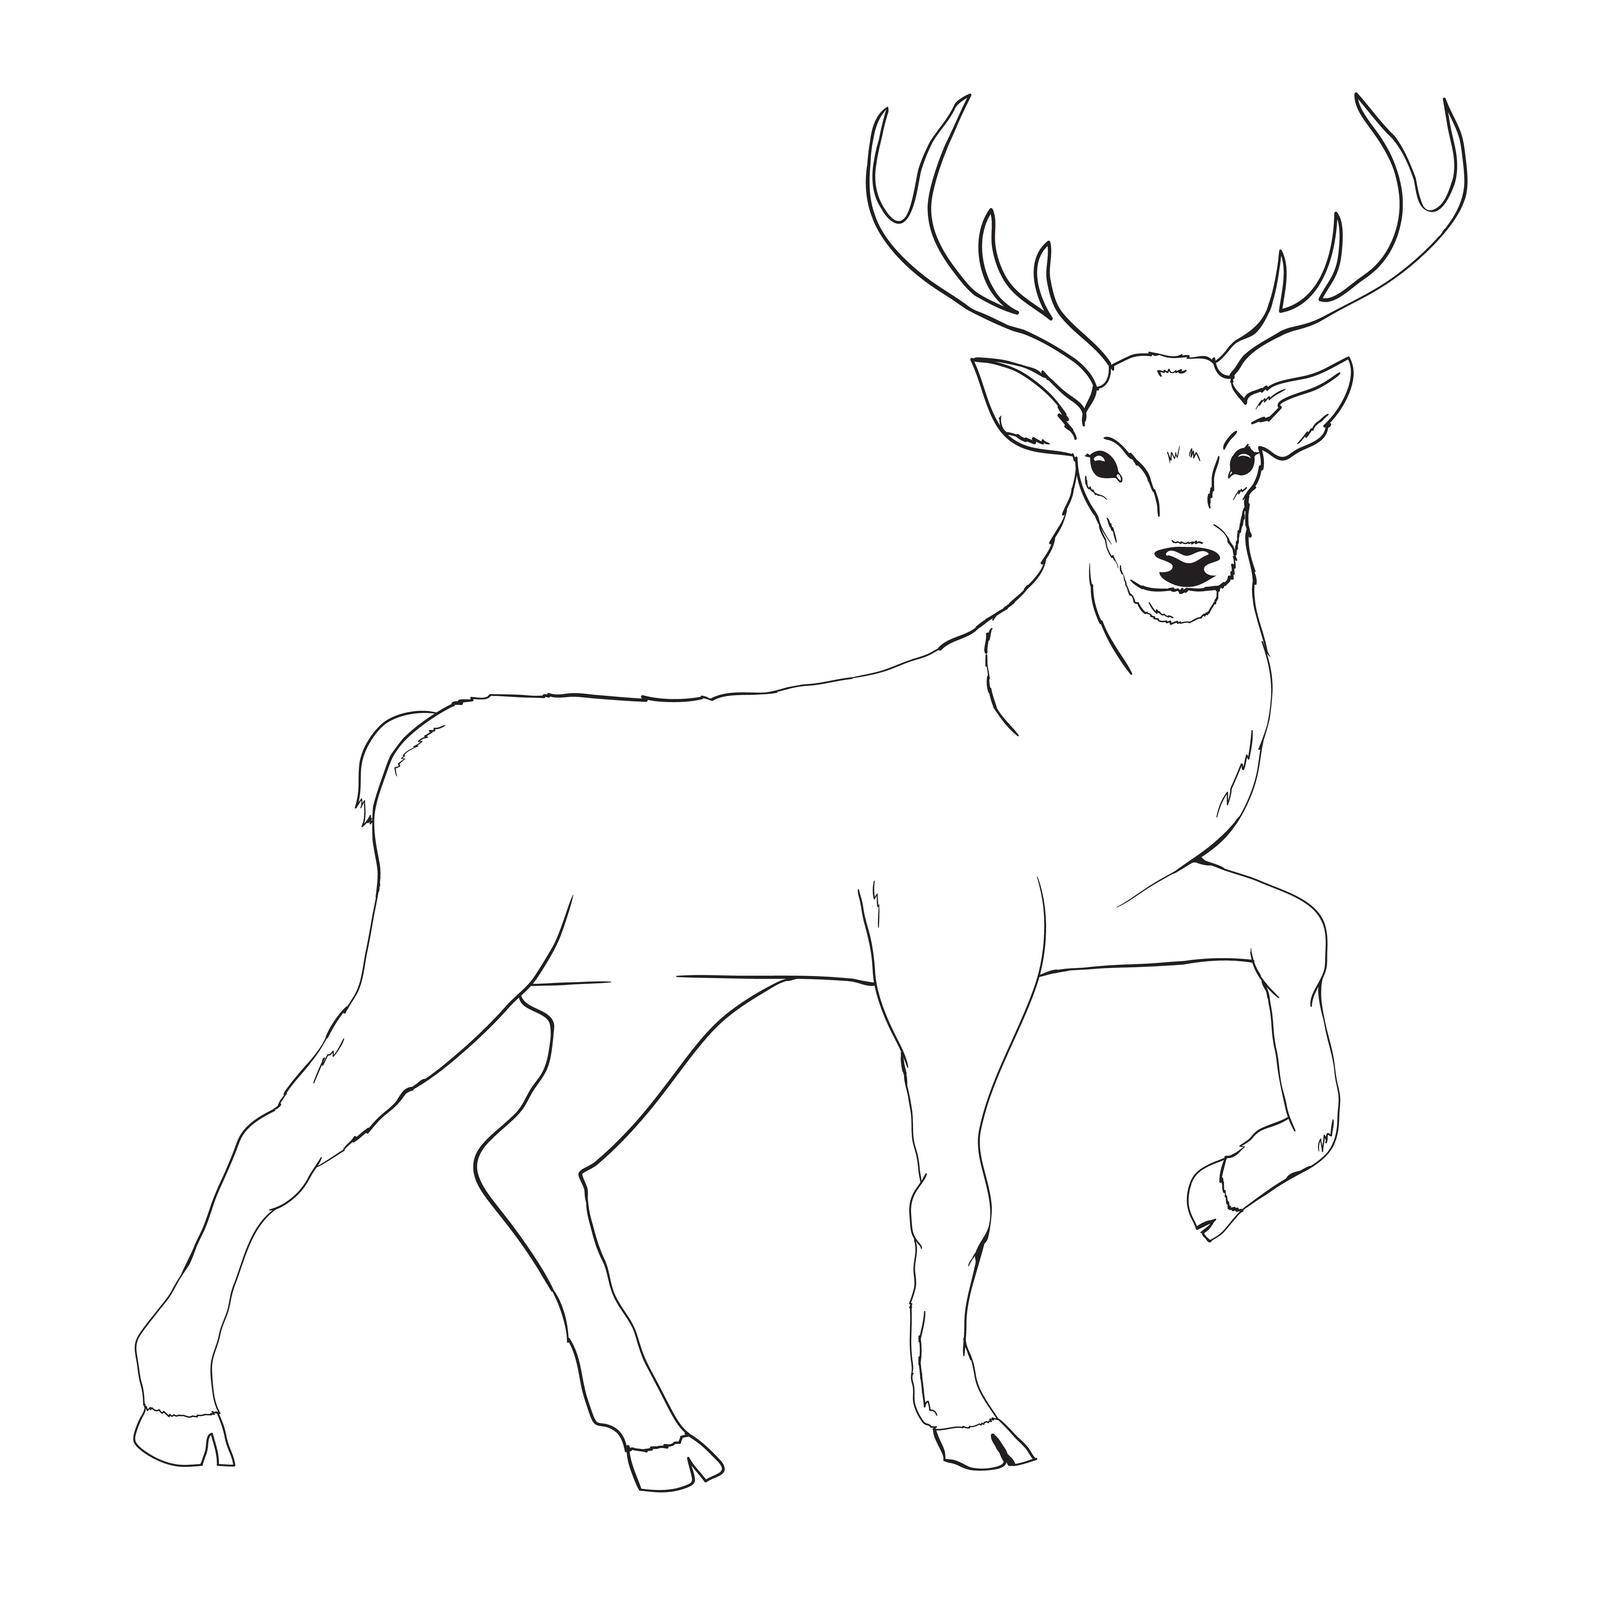 deer silhouette and sketch, vector, illustration, animals on white background